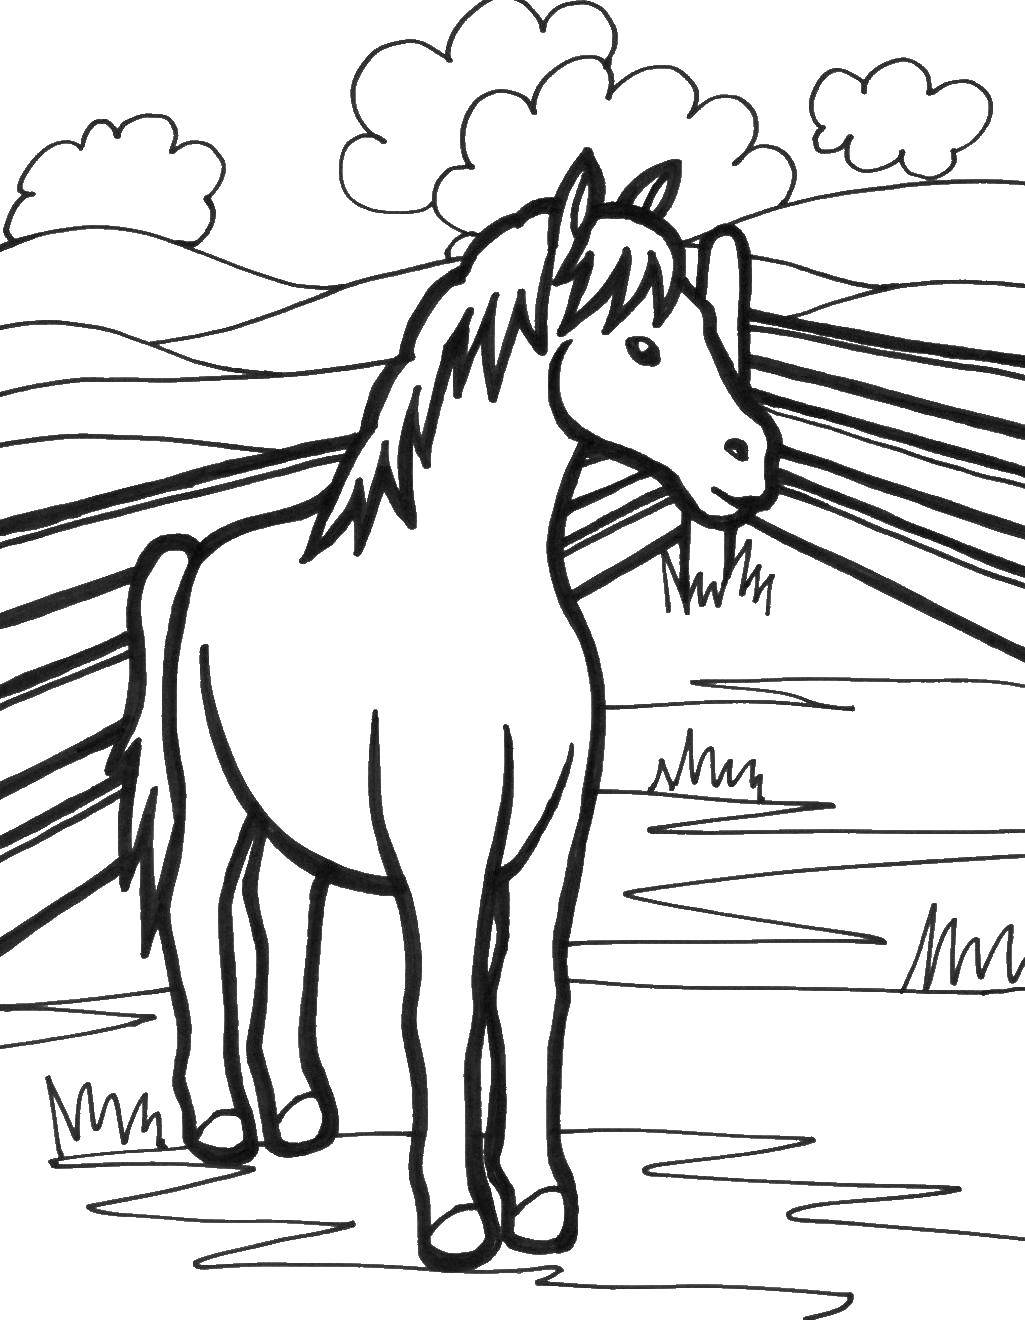 Coloring Horse. Category animals. Tags:  horse.